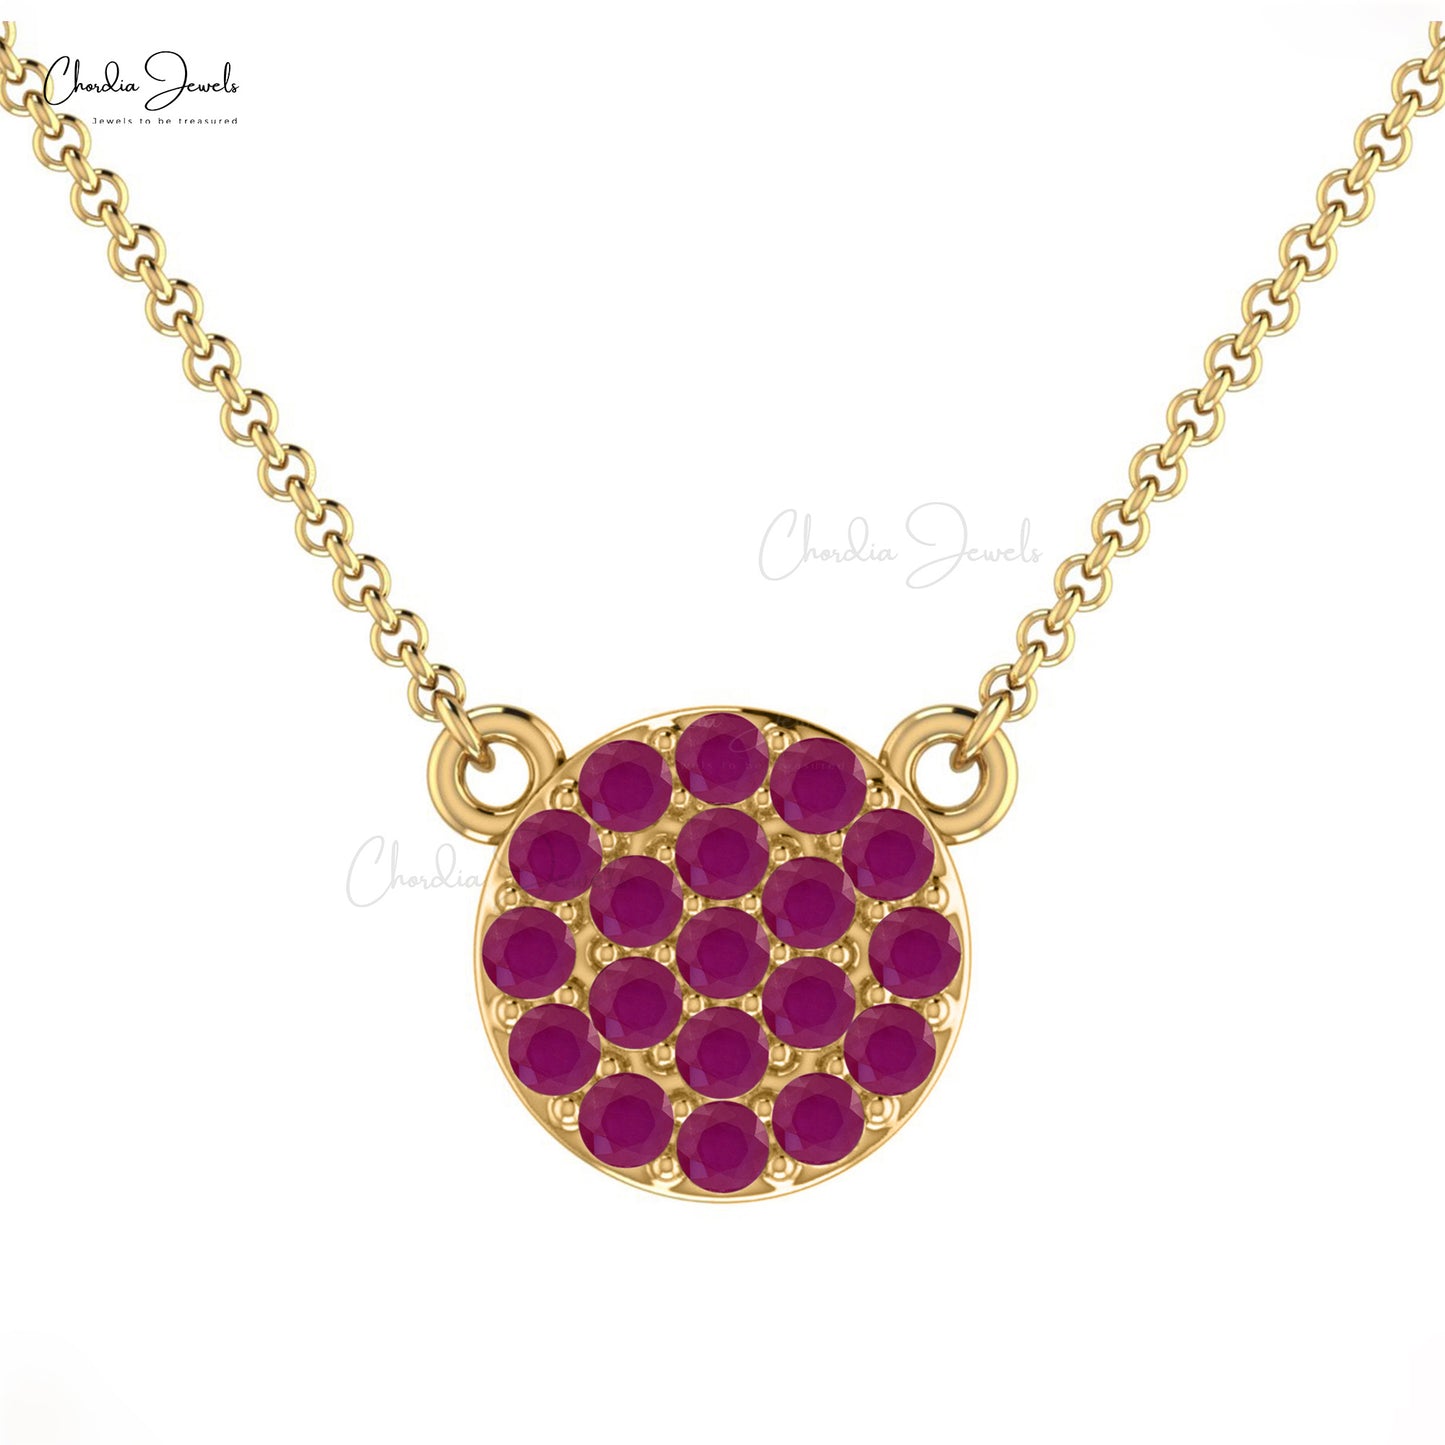 Dainty Ruby Cluster Halo Necklace for Women with Solid 14k Gold